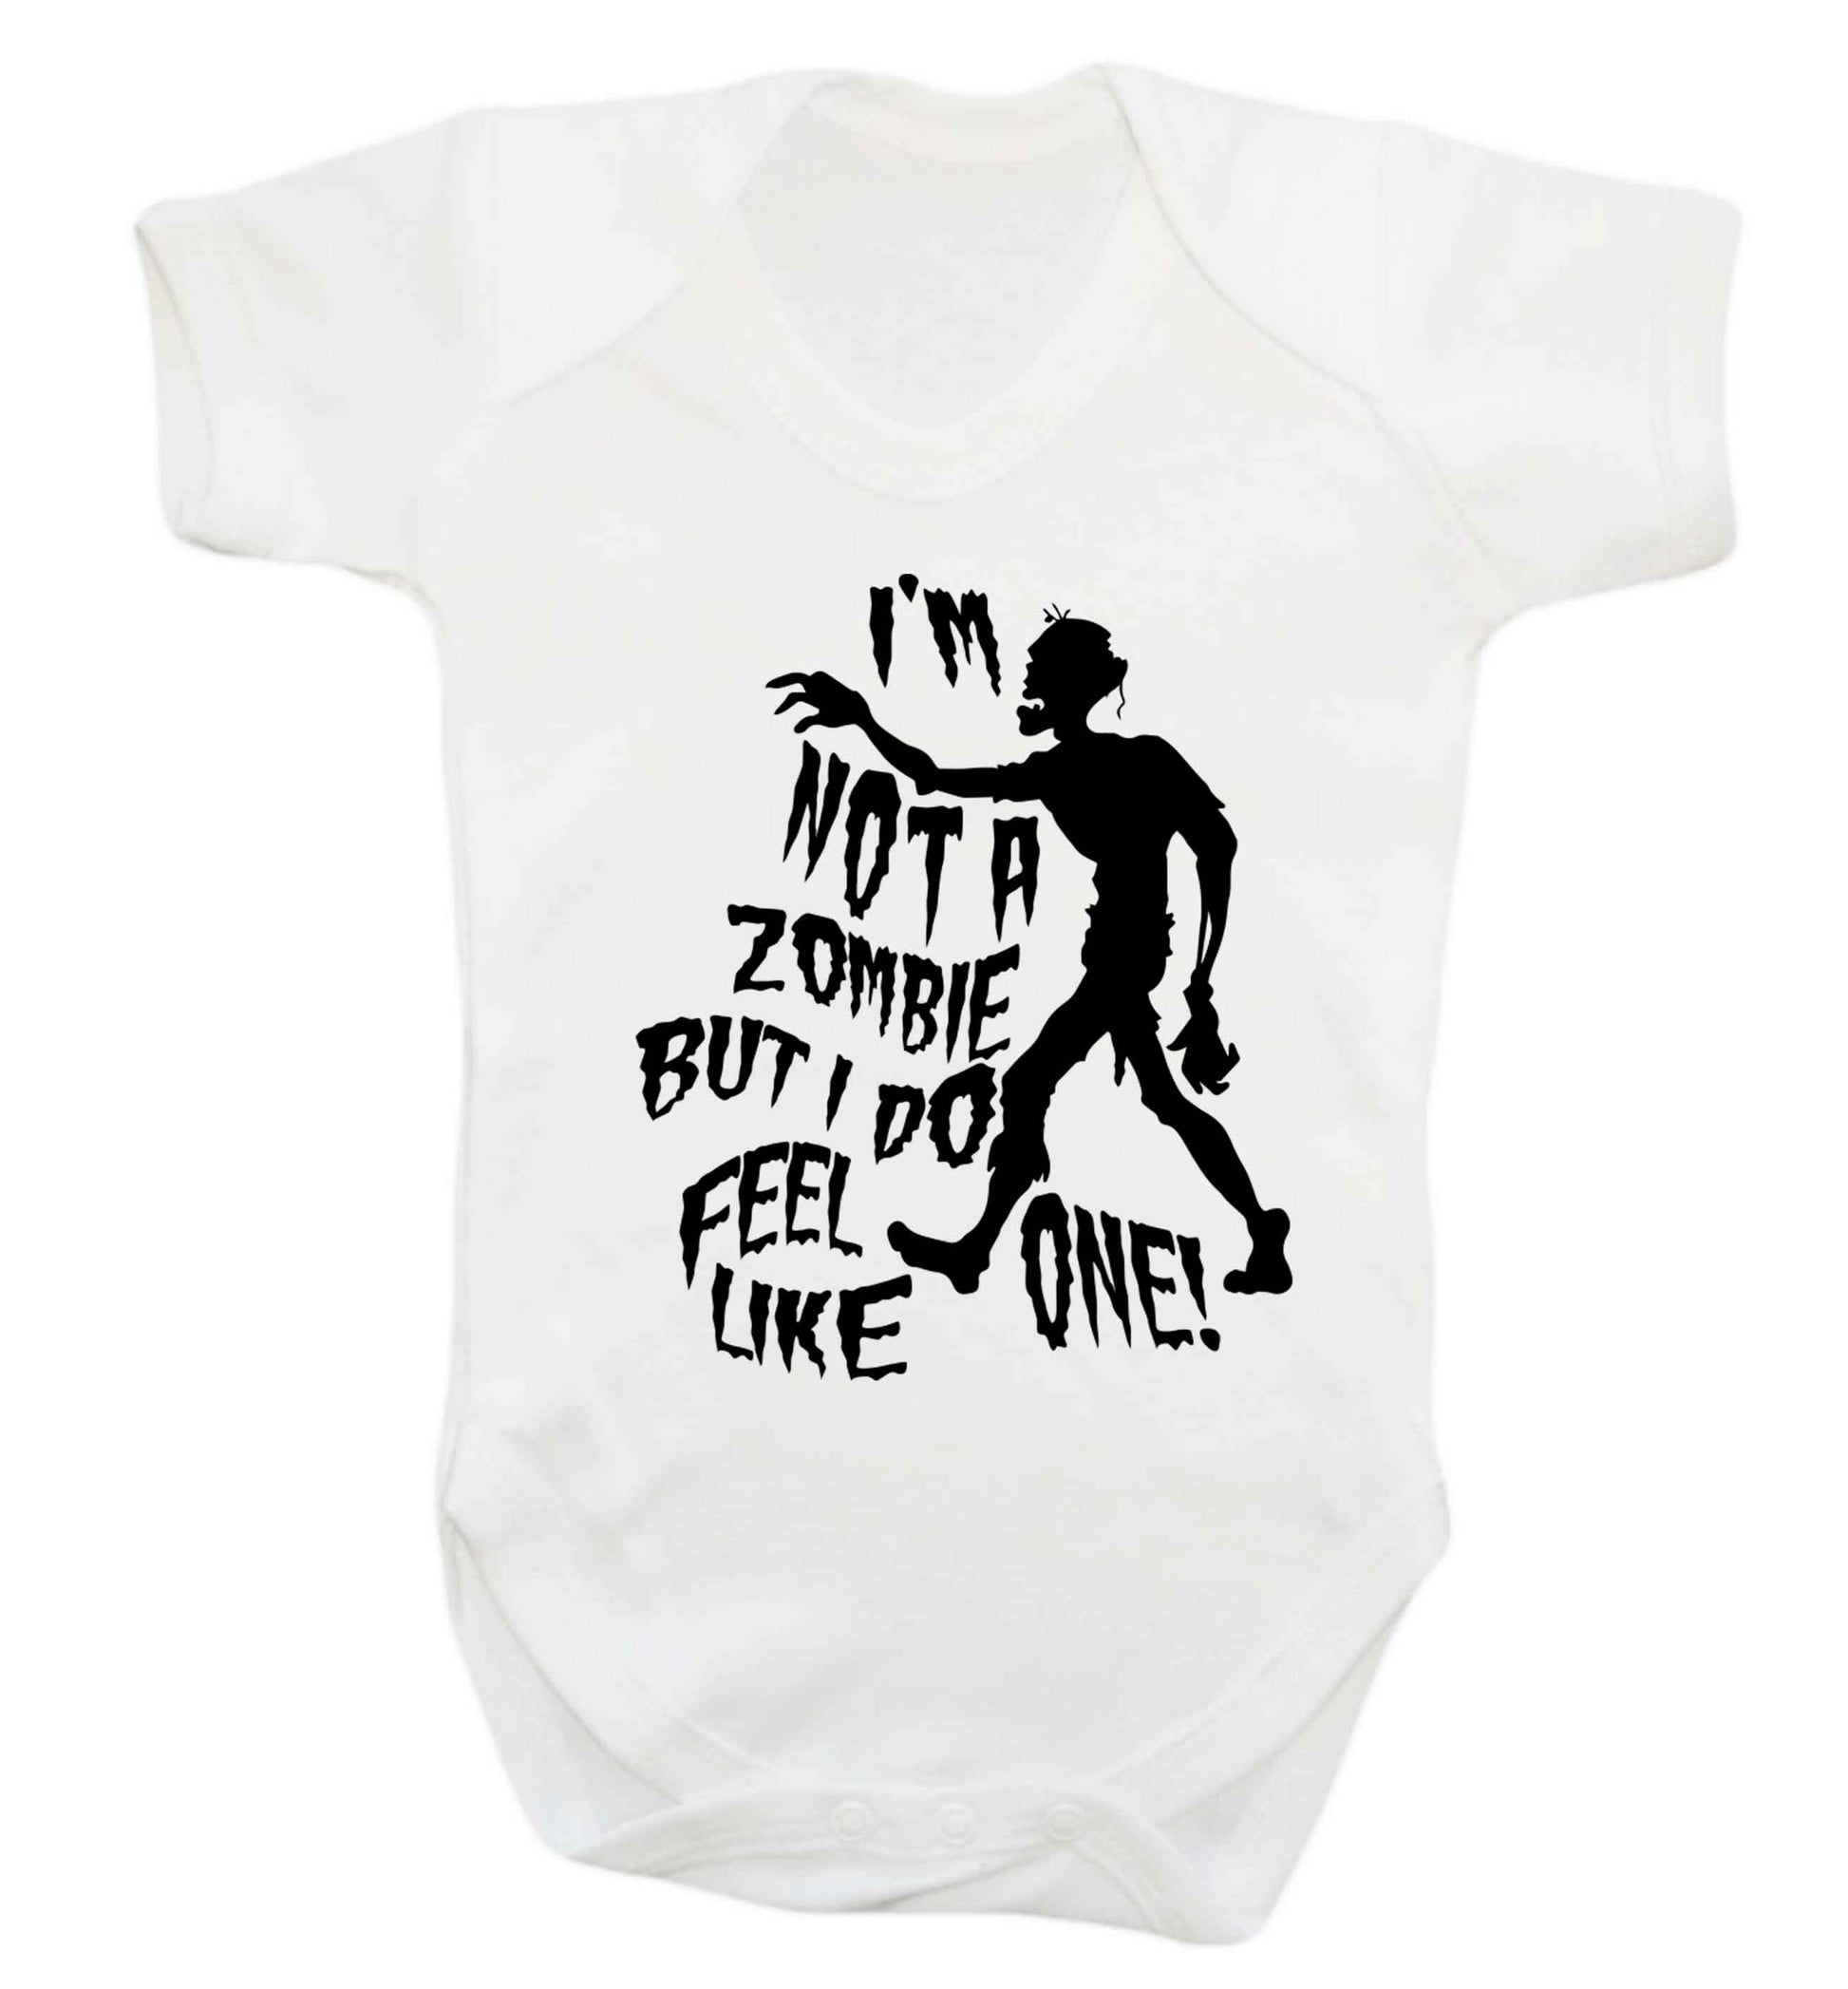 I'm not a zombie but I do feel like one! Baby Vest white 18-24 months